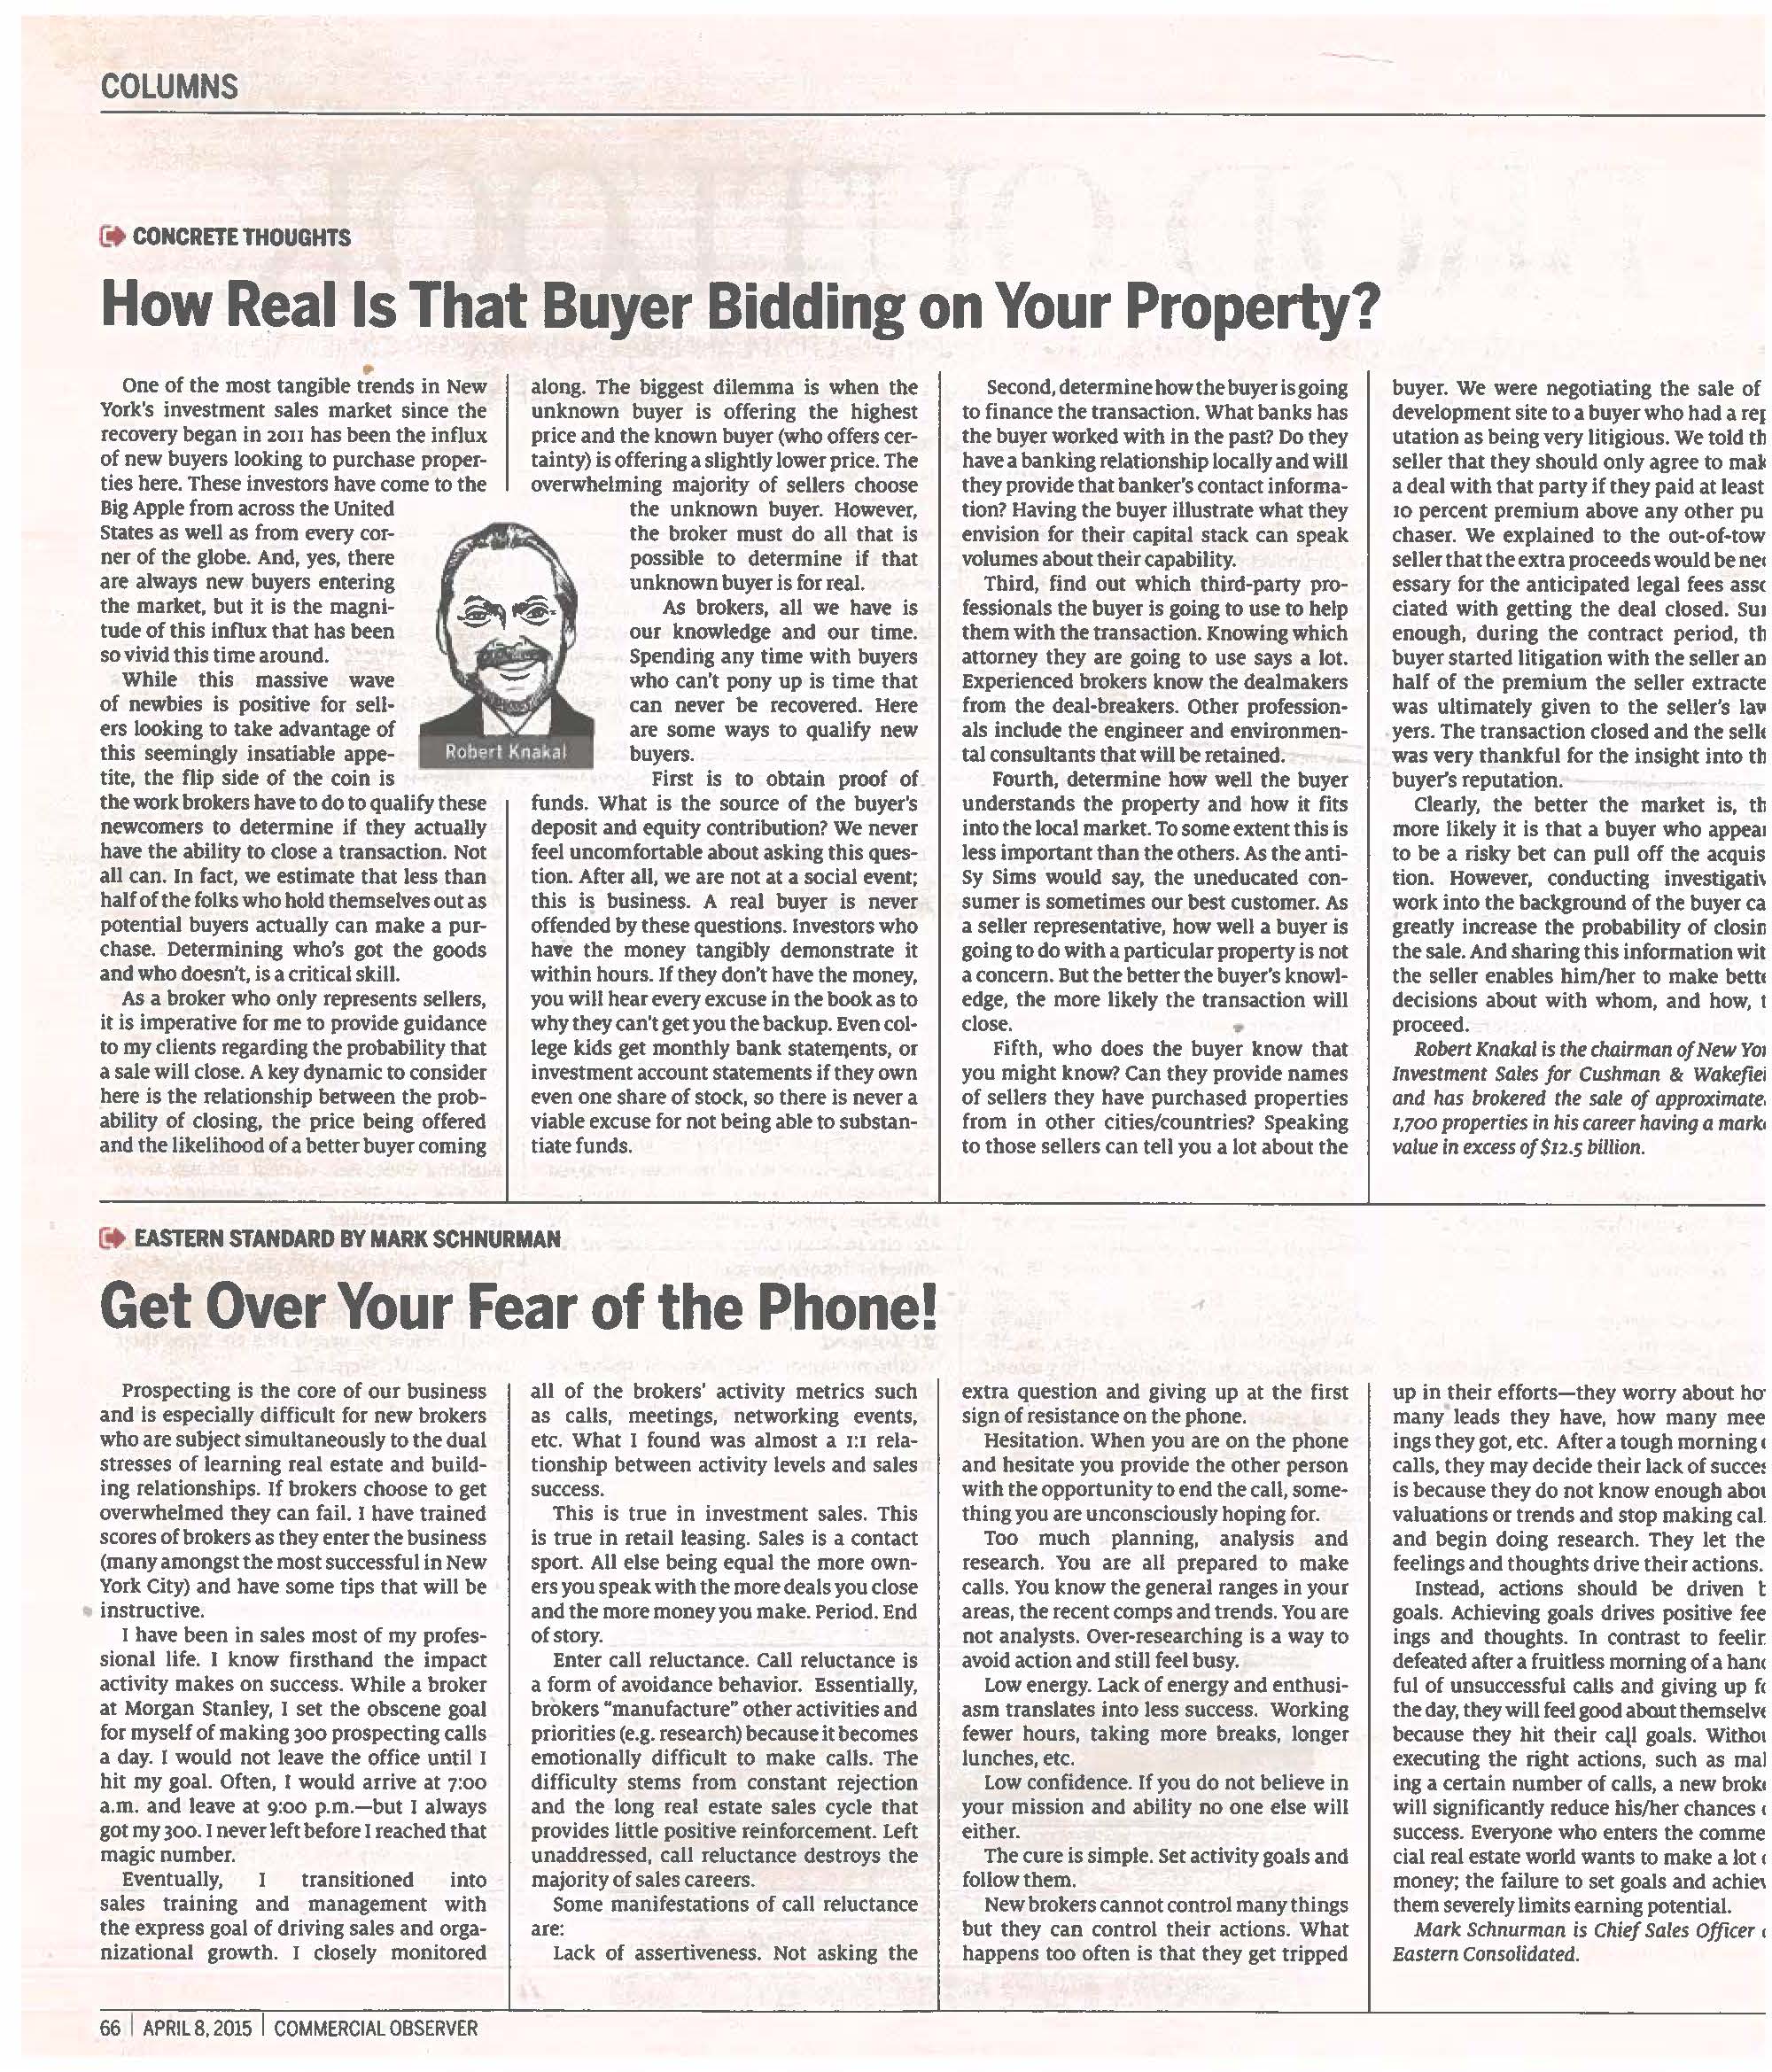 Concrete Thoughts - How Real Is That Buyer Bidding on Your Property - April 8 2015